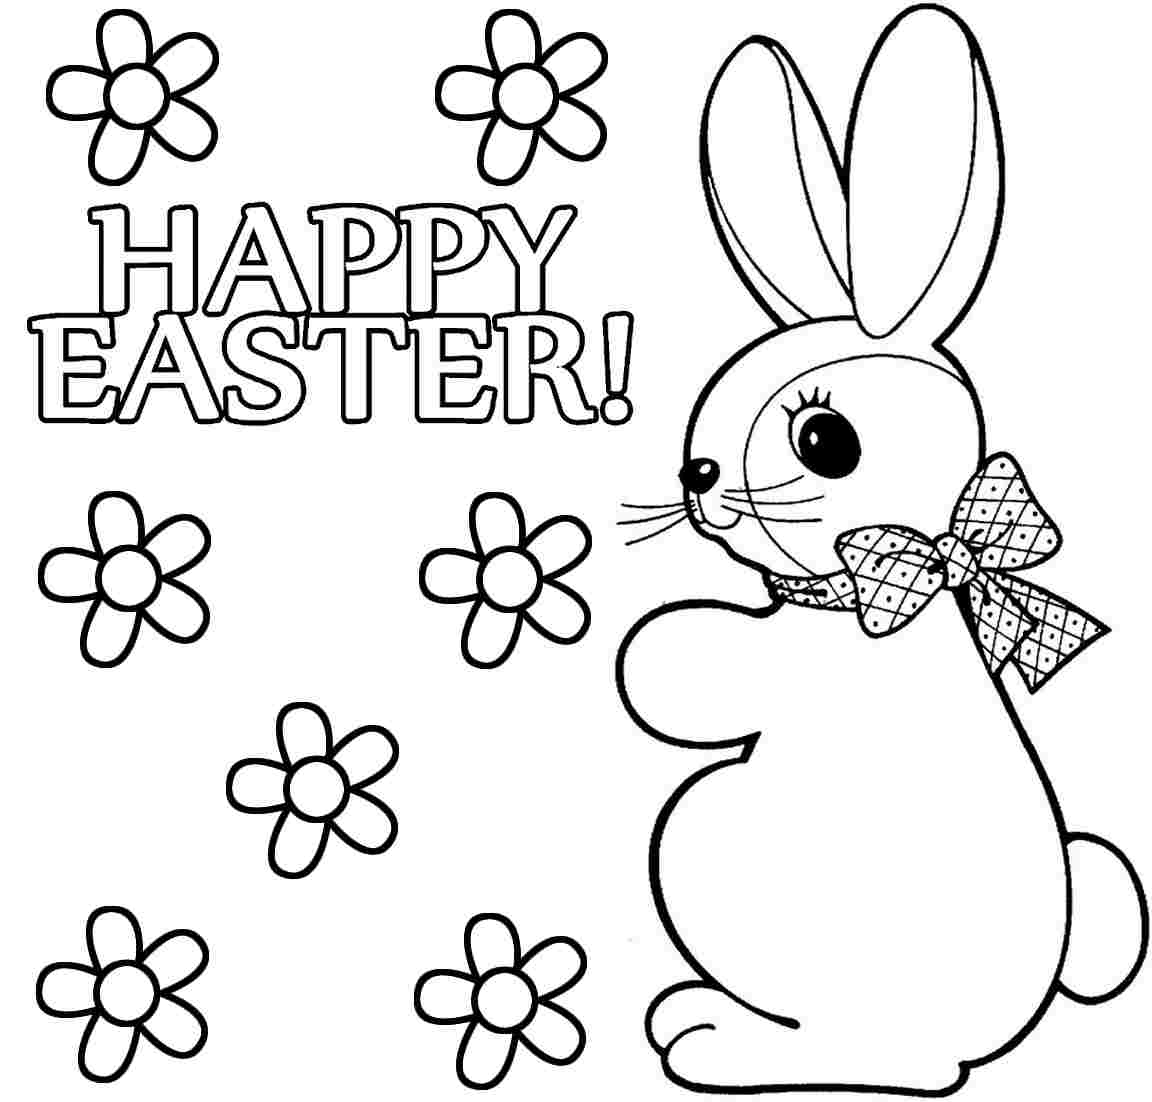 Free Easter Bunny Coloring Pages at GetDrawings Free download